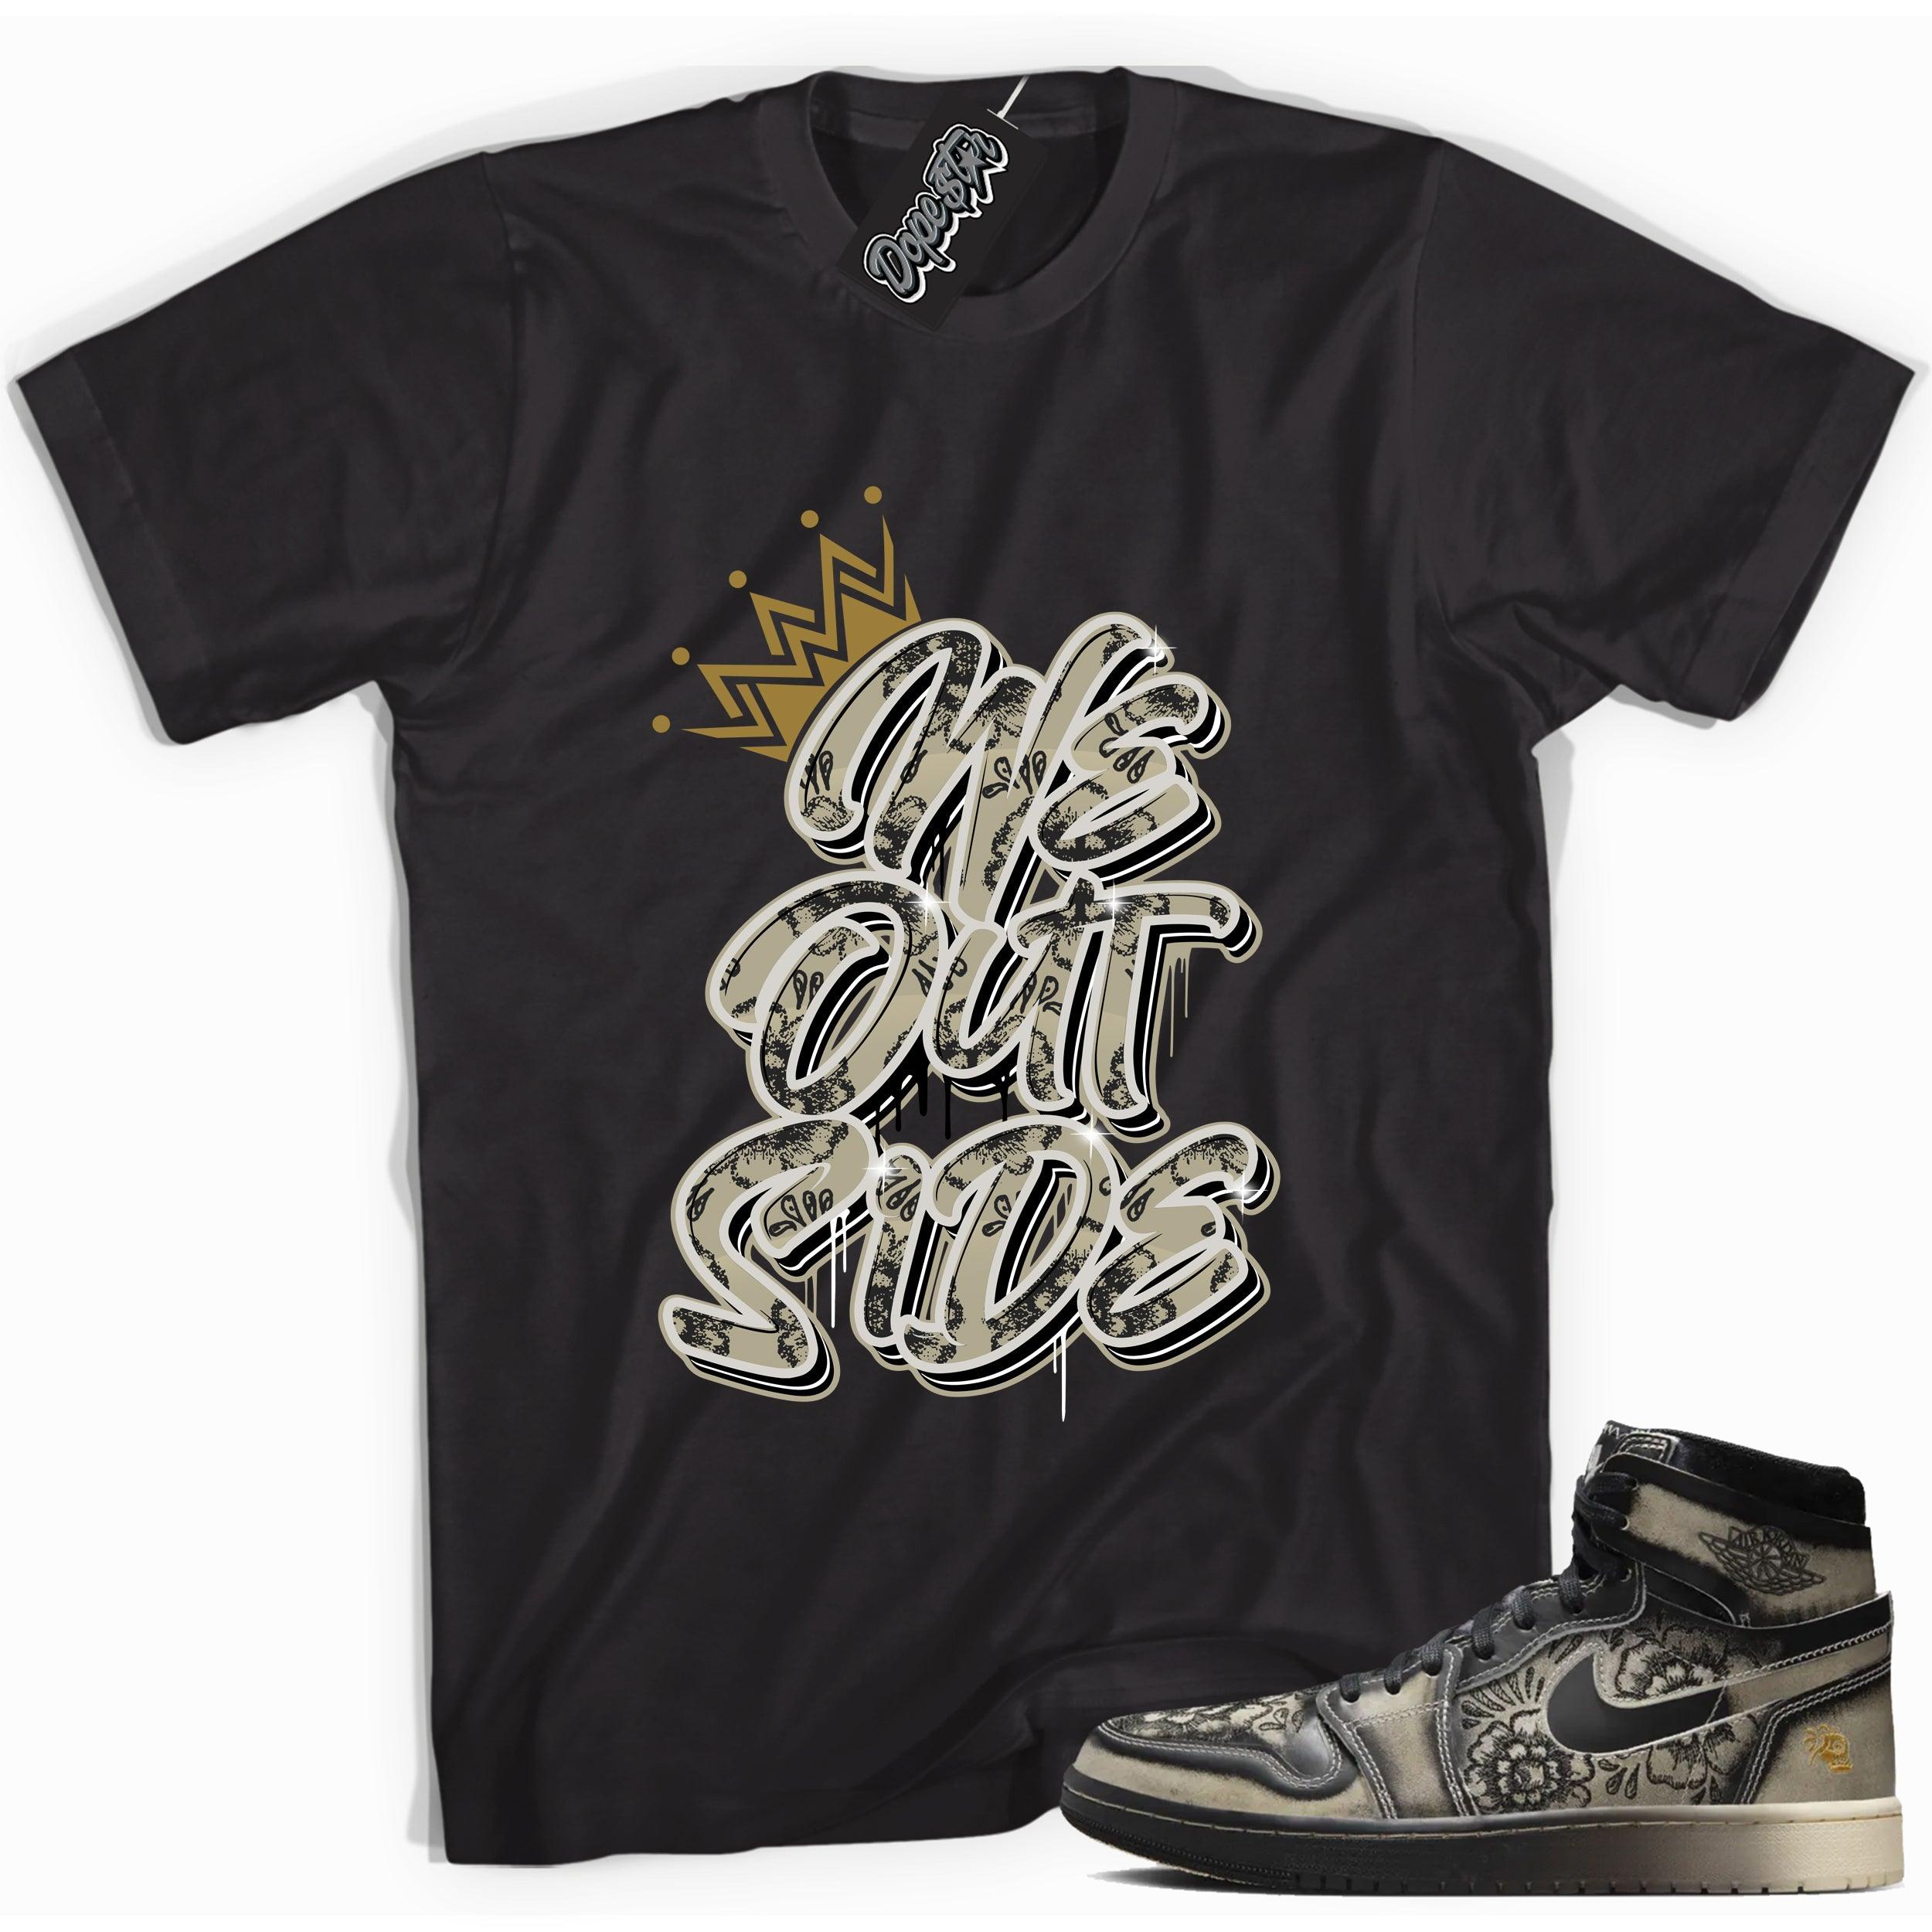 Cool Black graphic tee with “ We Outside ” print, that perfectly matches Air Jordan 1 High Zoom Comfort 2 Dia de Muertos Black and Pale Ivory sneakers 